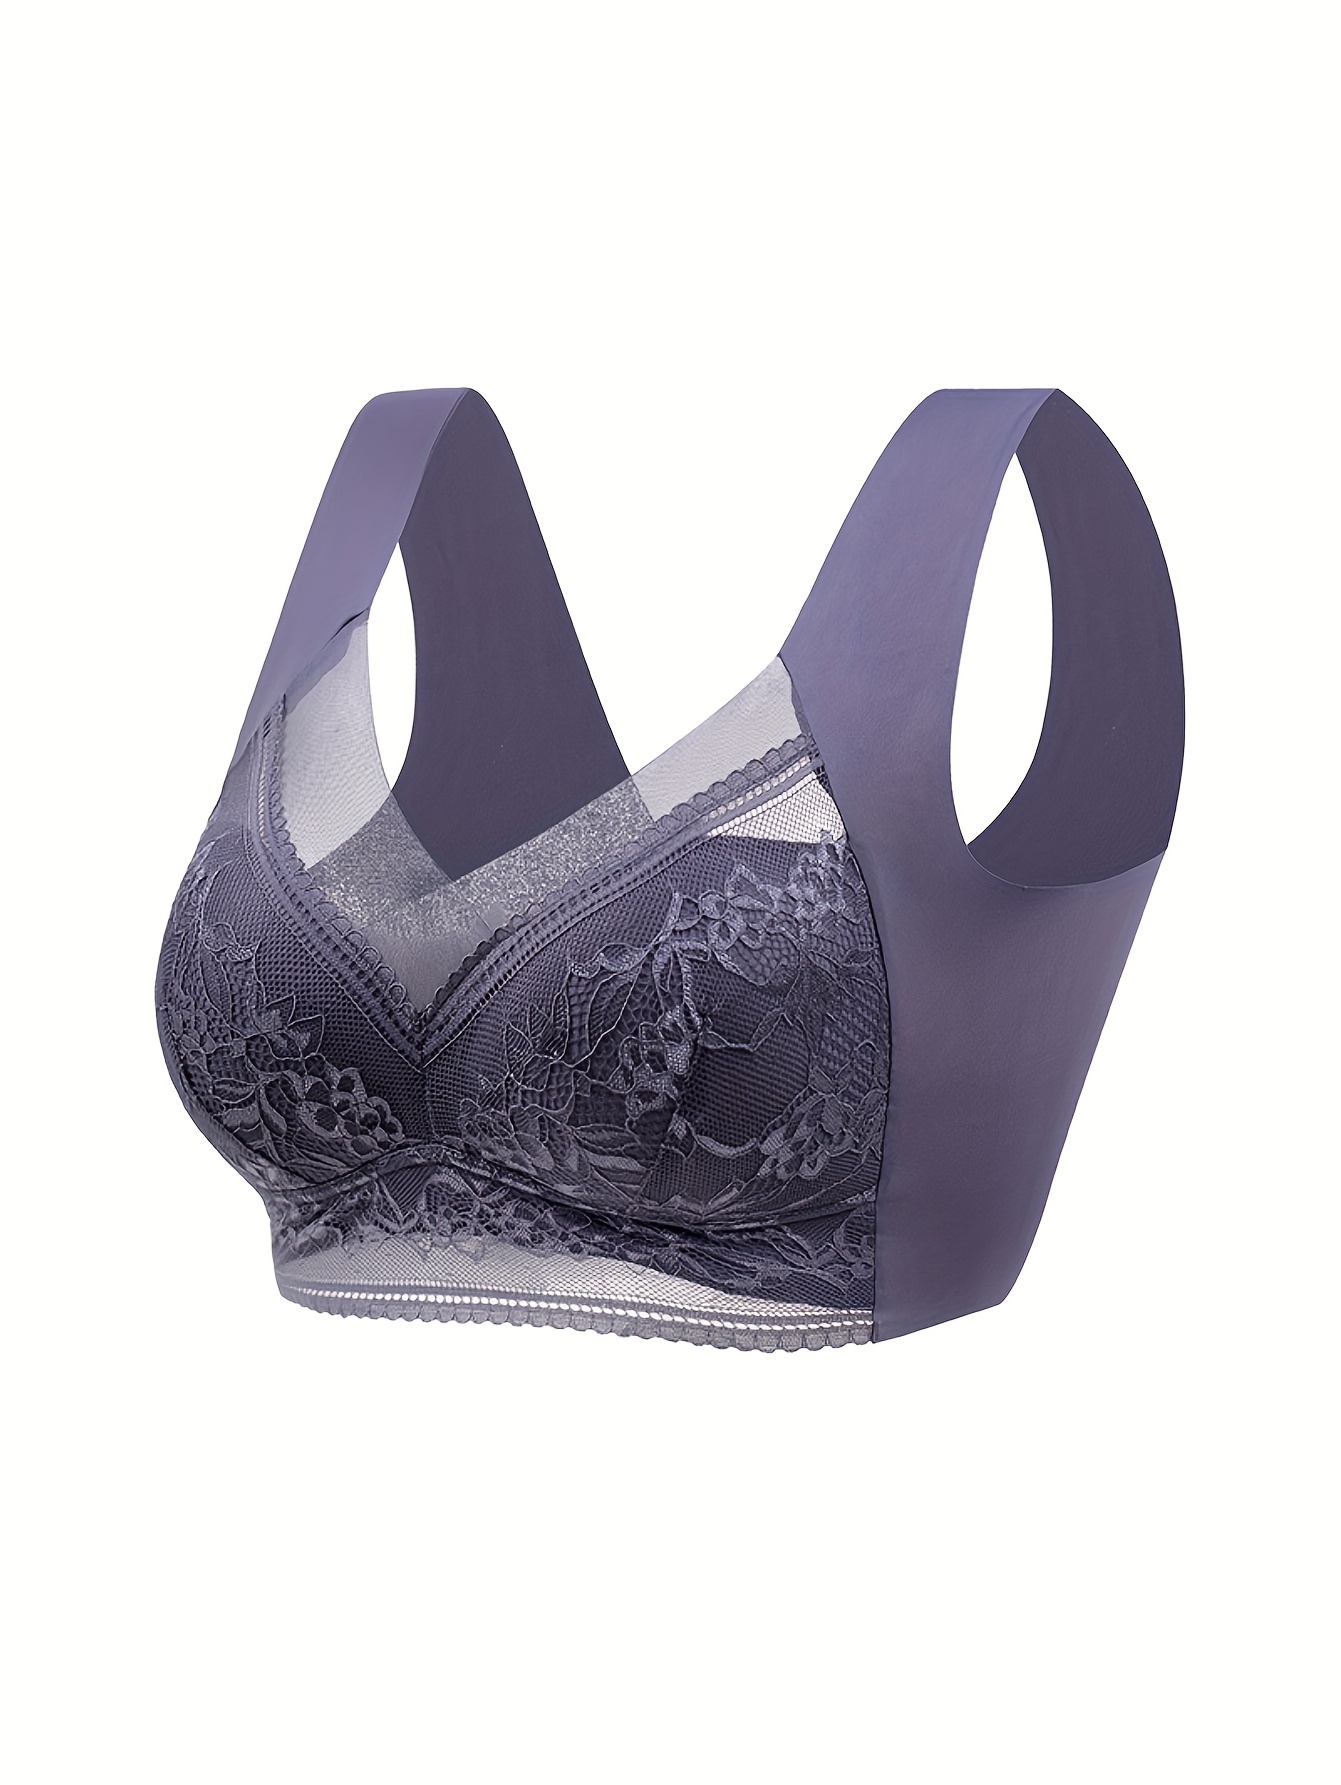 Lace Bras for Women Seamless Full Coverage Bra Wireless Sexy Push